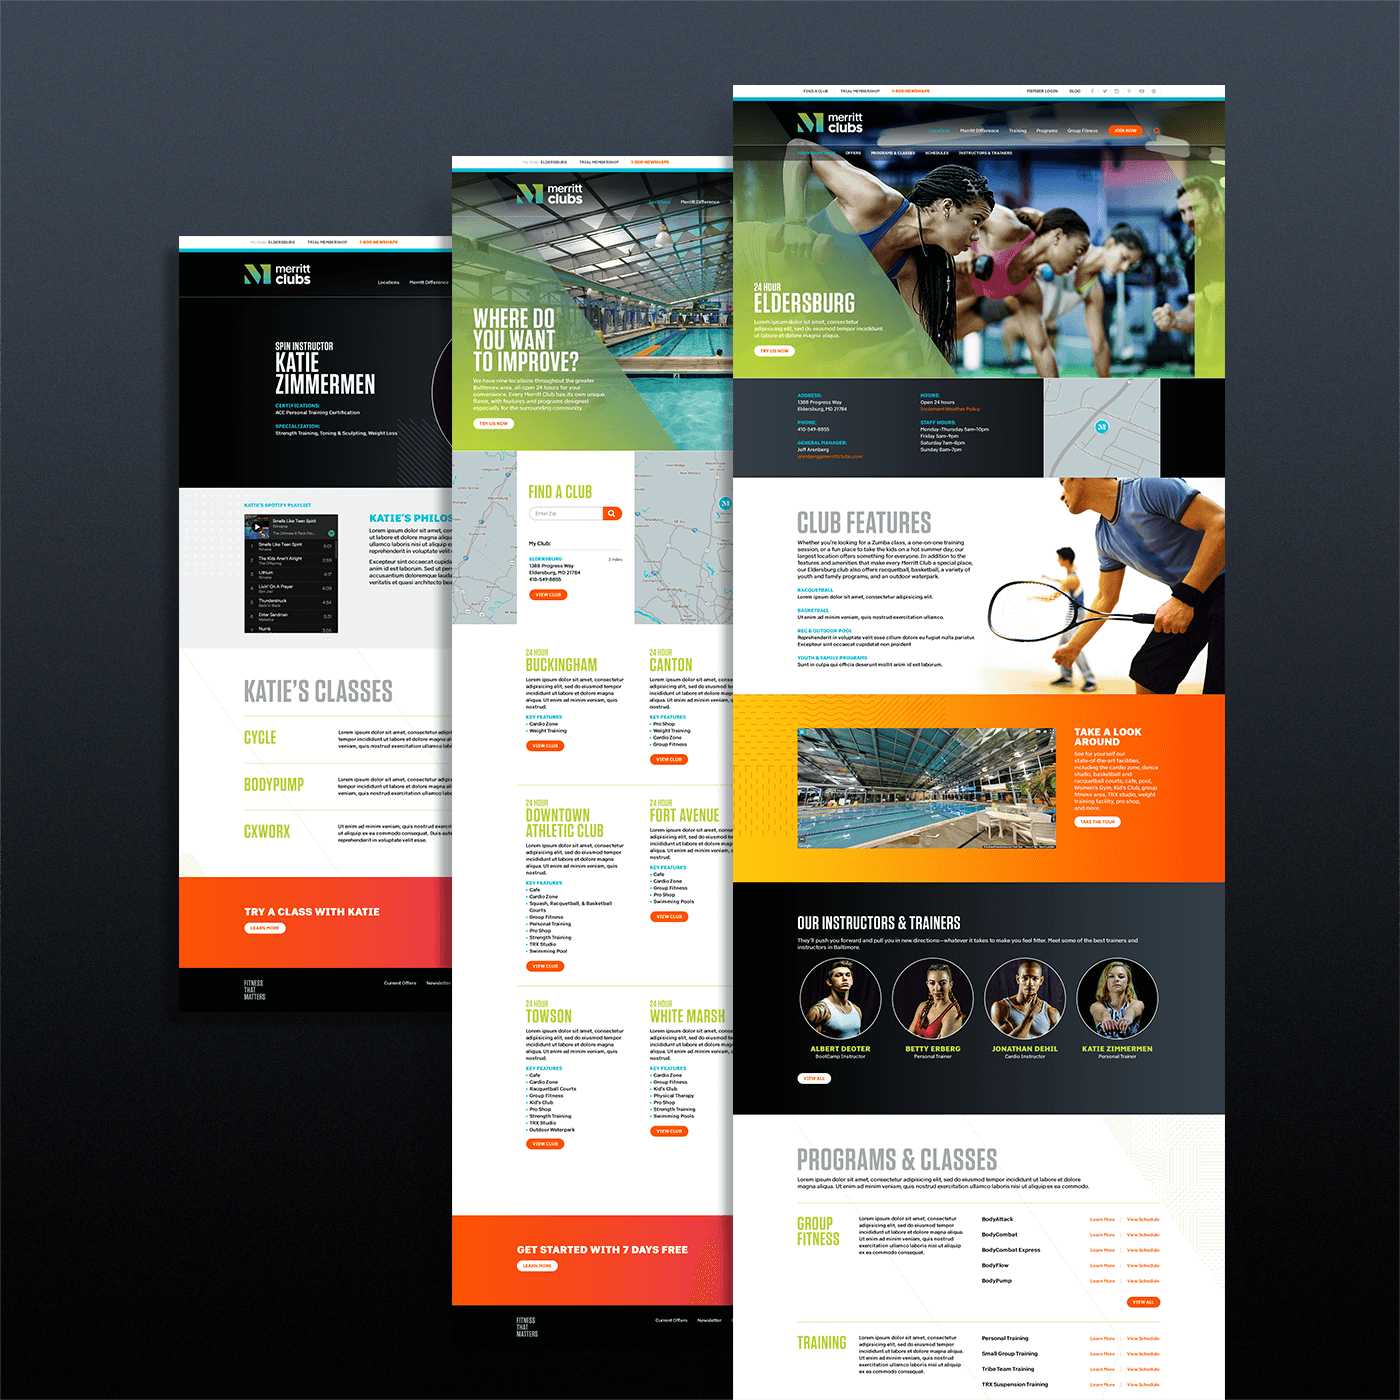 Fully responsive web design based on the visual identity created by our designers and brand strategists.